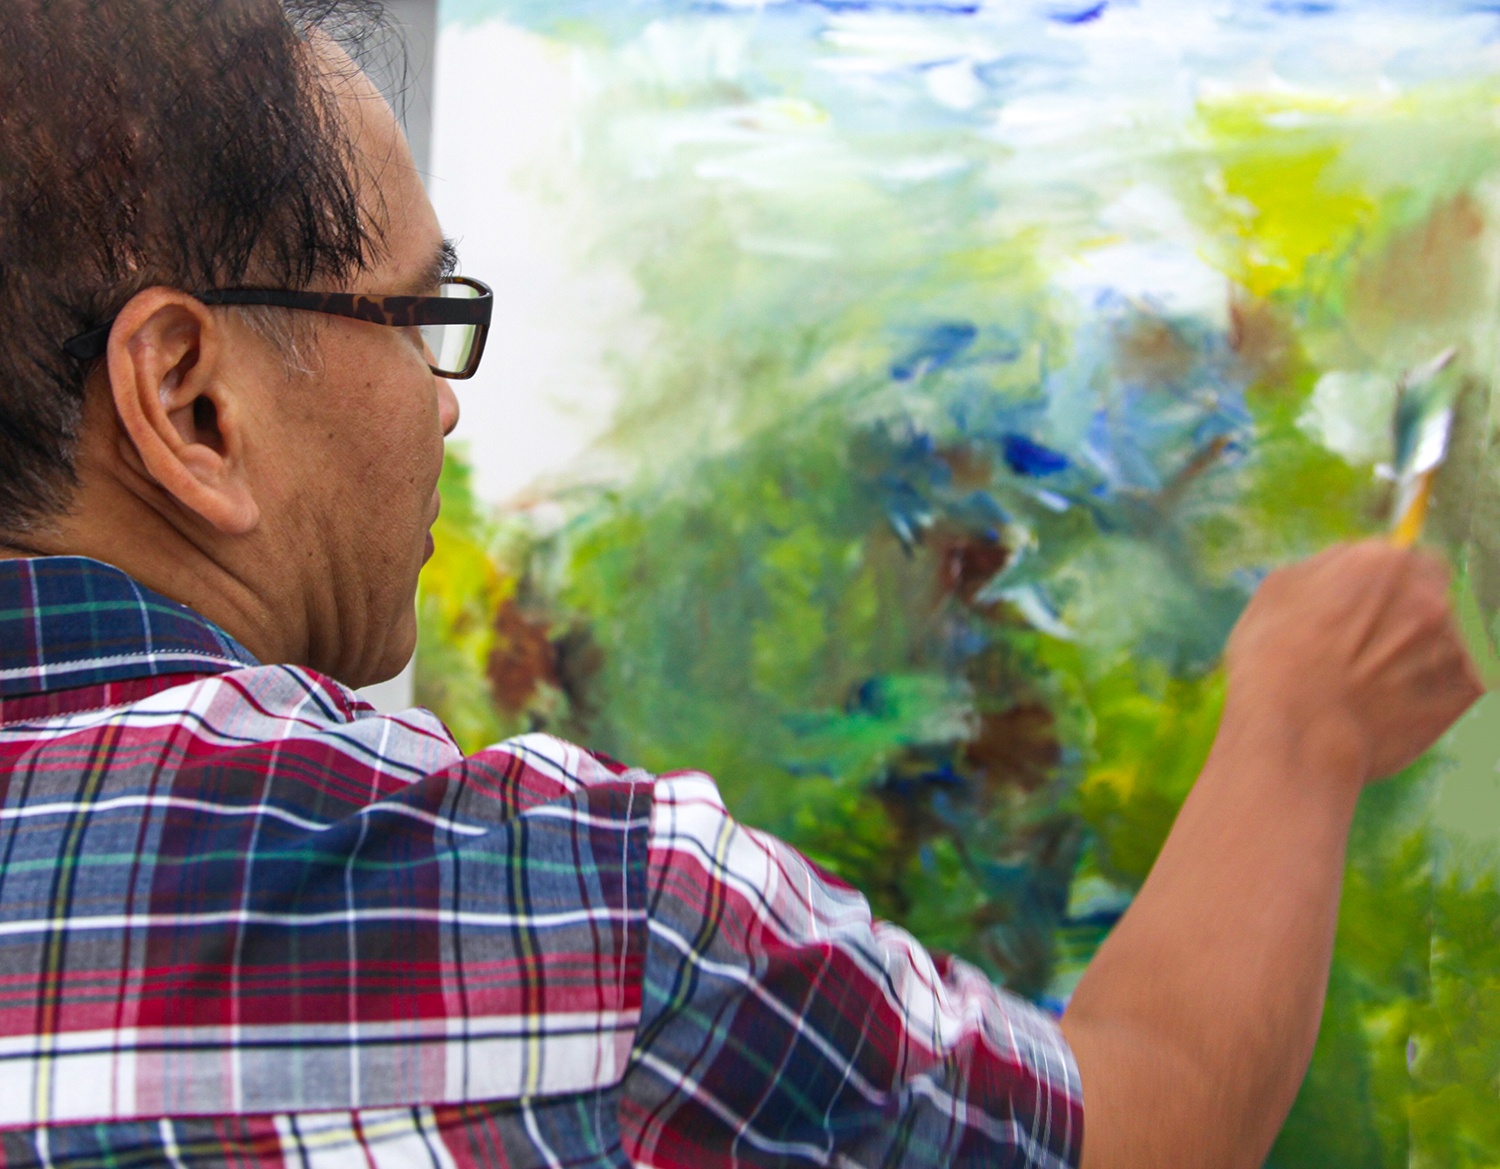 This image features an artist applying shades of white to his abstract green painting.